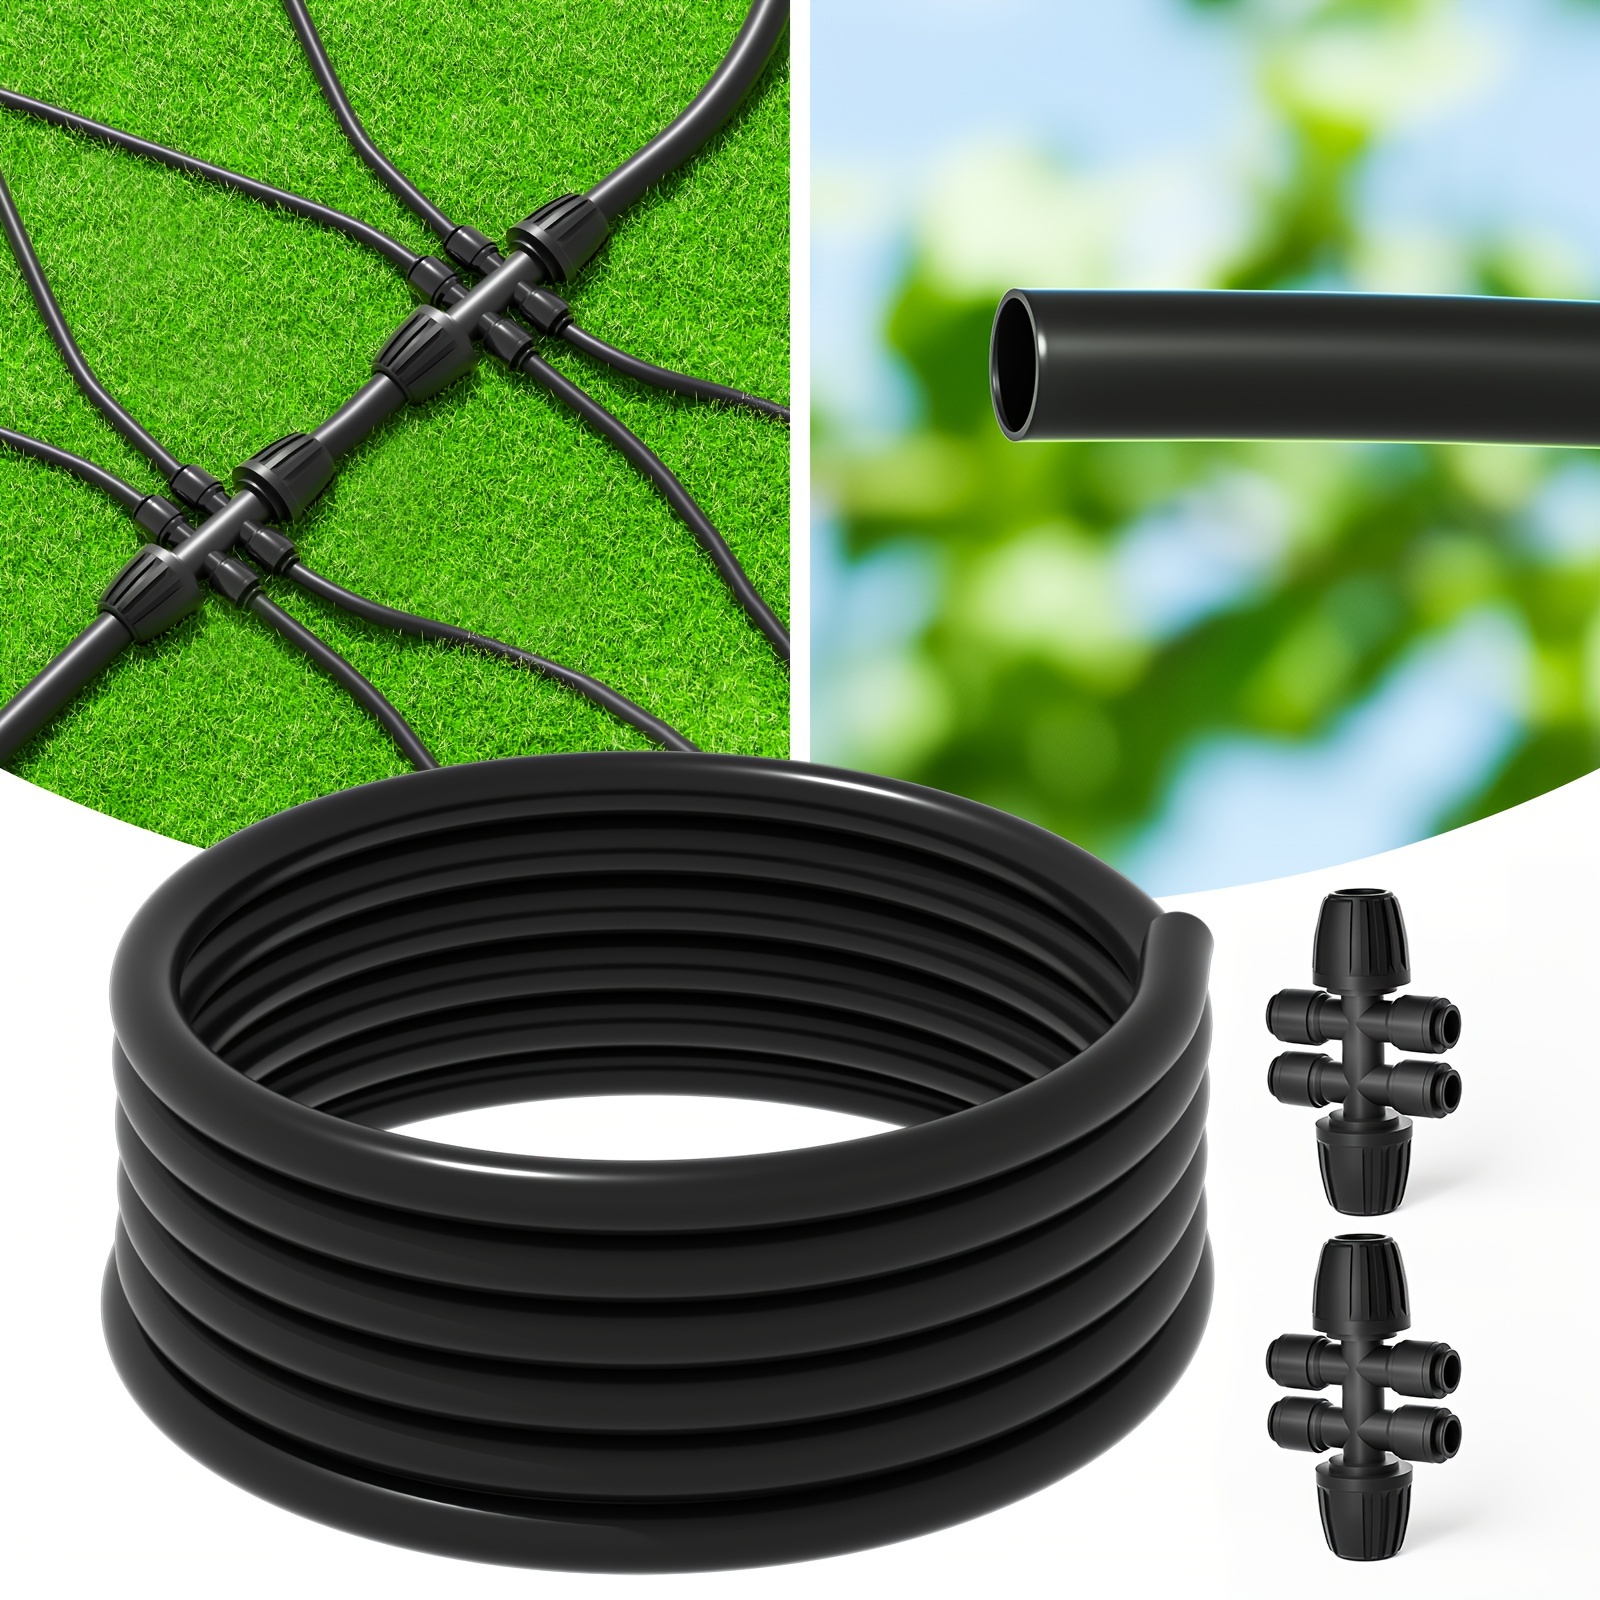 

25ft 1/2" Drip Irrigation Kit: Premium Garden And Landscape Watering System With 2 Quick Connectors, 4-way Rubber Hose Connector, Universal Thread Standard For Europe & America